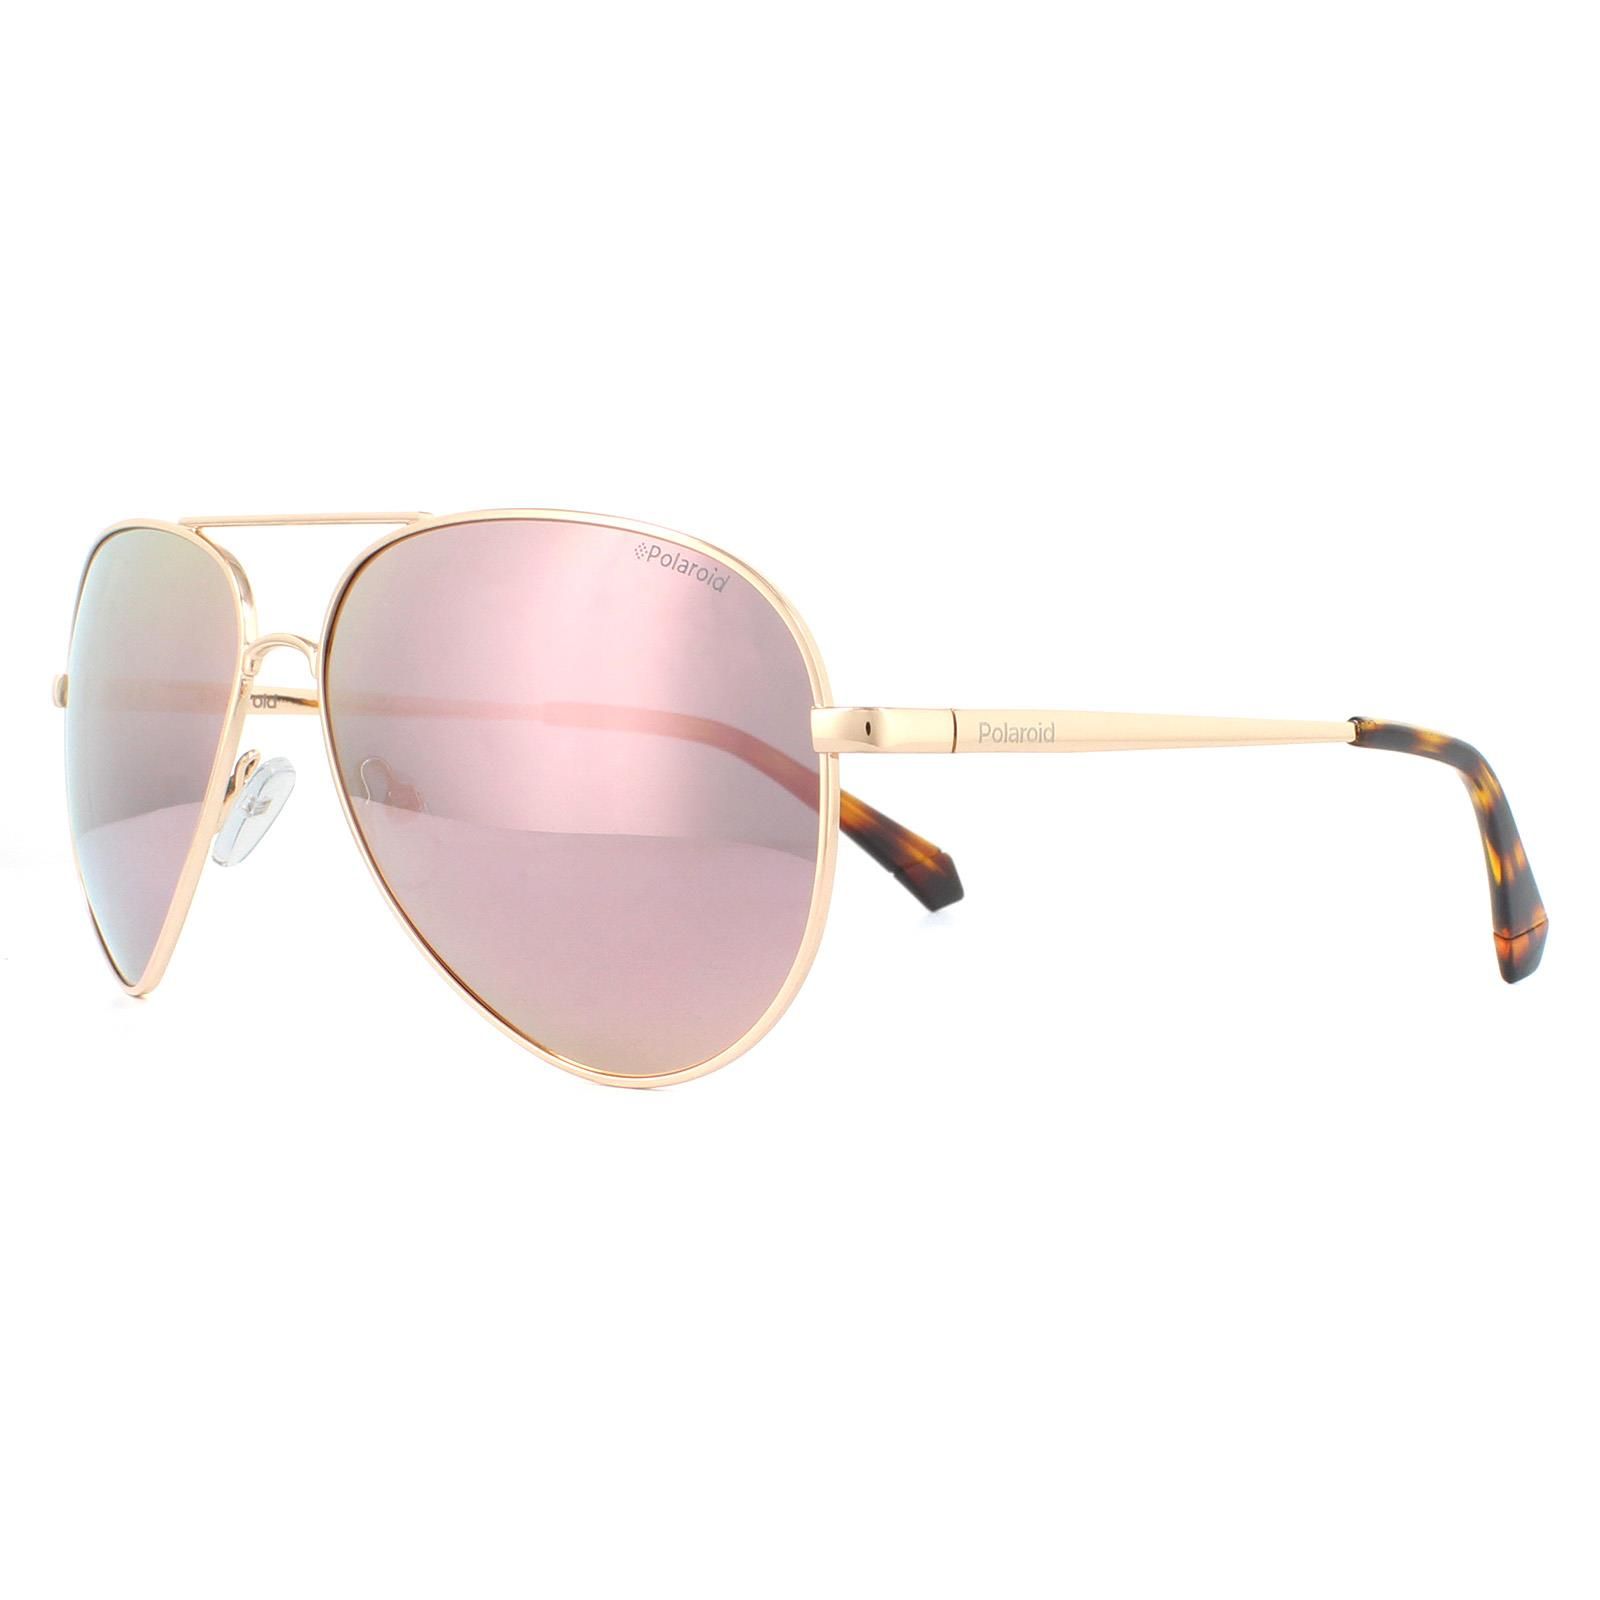 Polaroid Sunglasses PLD 6012/N/NEW DDB JQ Gold Copper Rose Gold Mirror Polarized are a bang up to date bright colour themed model with coloured mirrored lenses giving a youthful look to the classic aviator style. The lenses all still have the superb Polaroid Ultrasight polarized lenses for glare reduction and comfortable all day clarity.